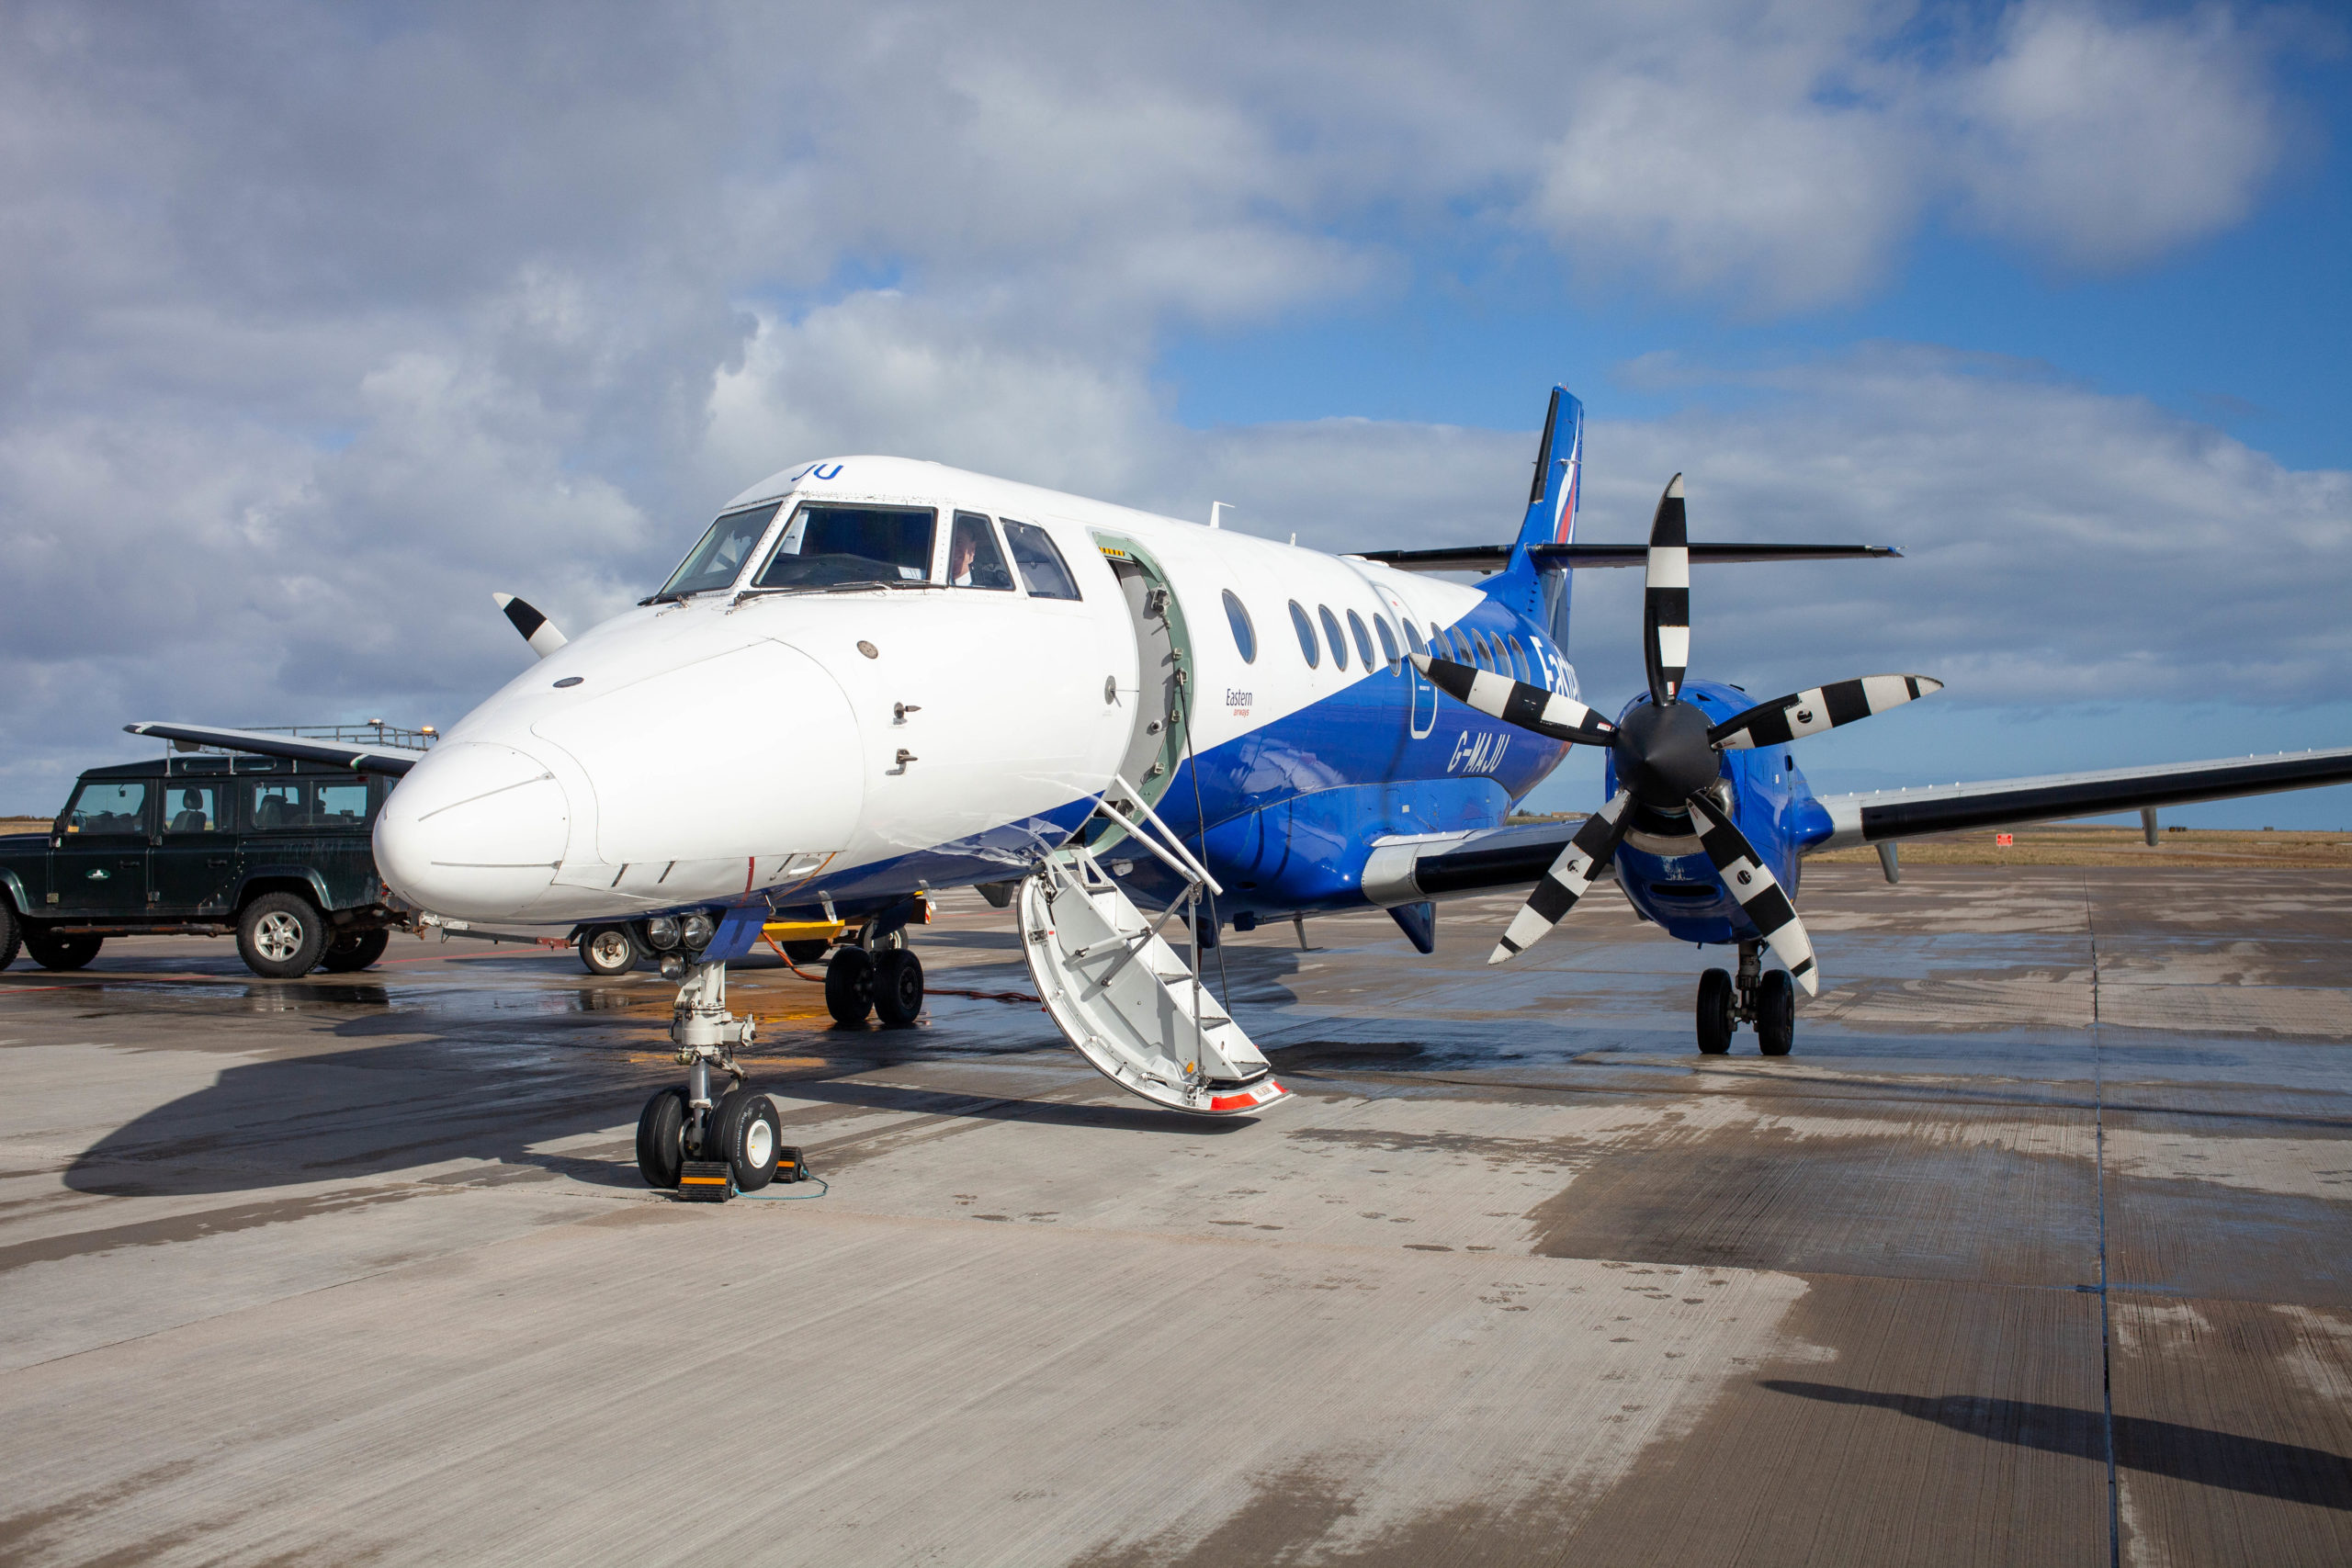 The Highland Council Wick – Aberdeen air services see a successful first year